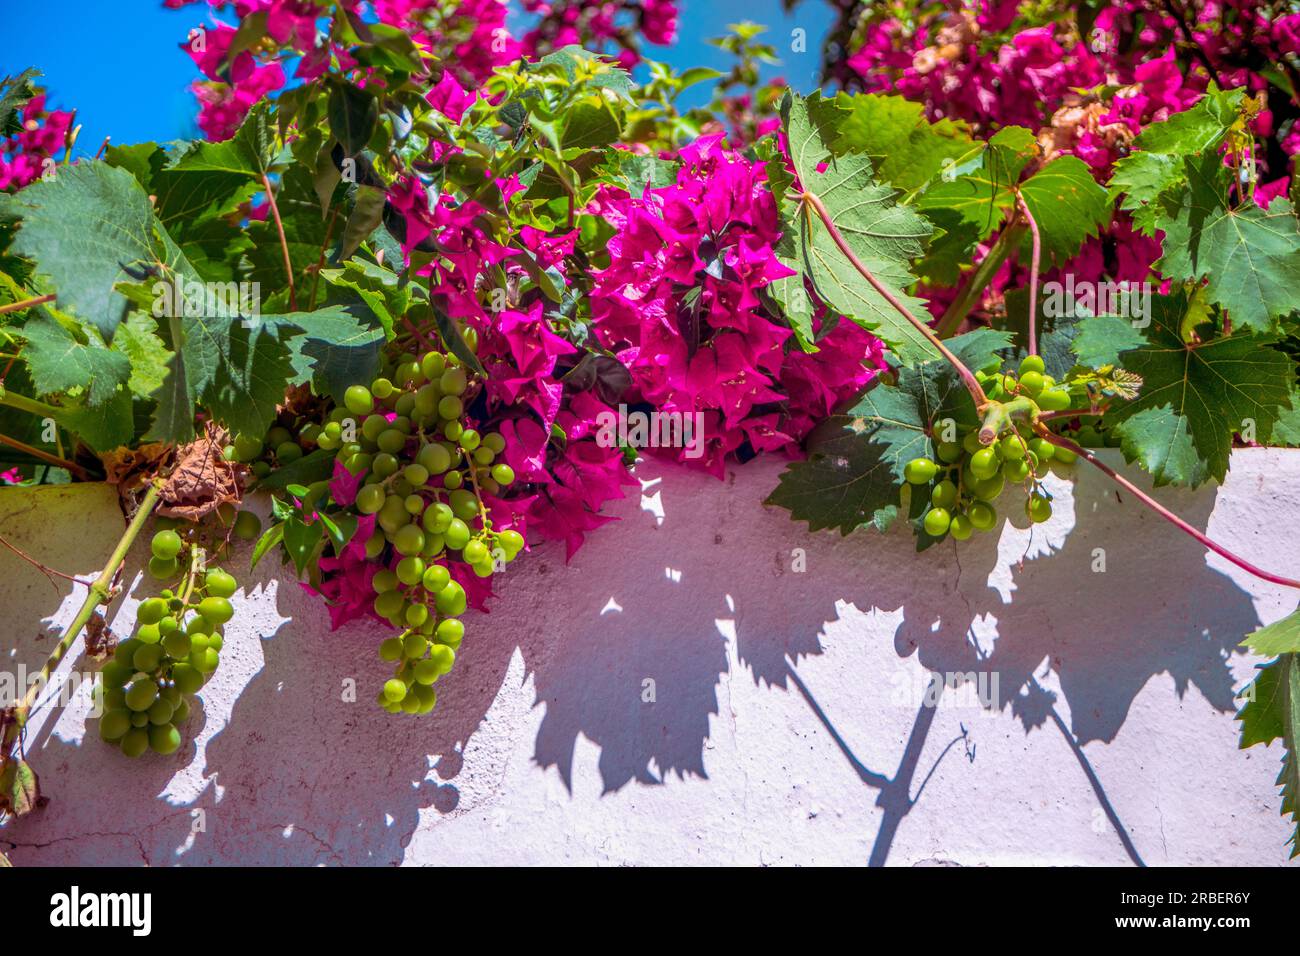 Whitewashed wall with pink or purple bougainvillea with vine leaves and bunches of green grapes casting their shadow on the wall Stock Photo